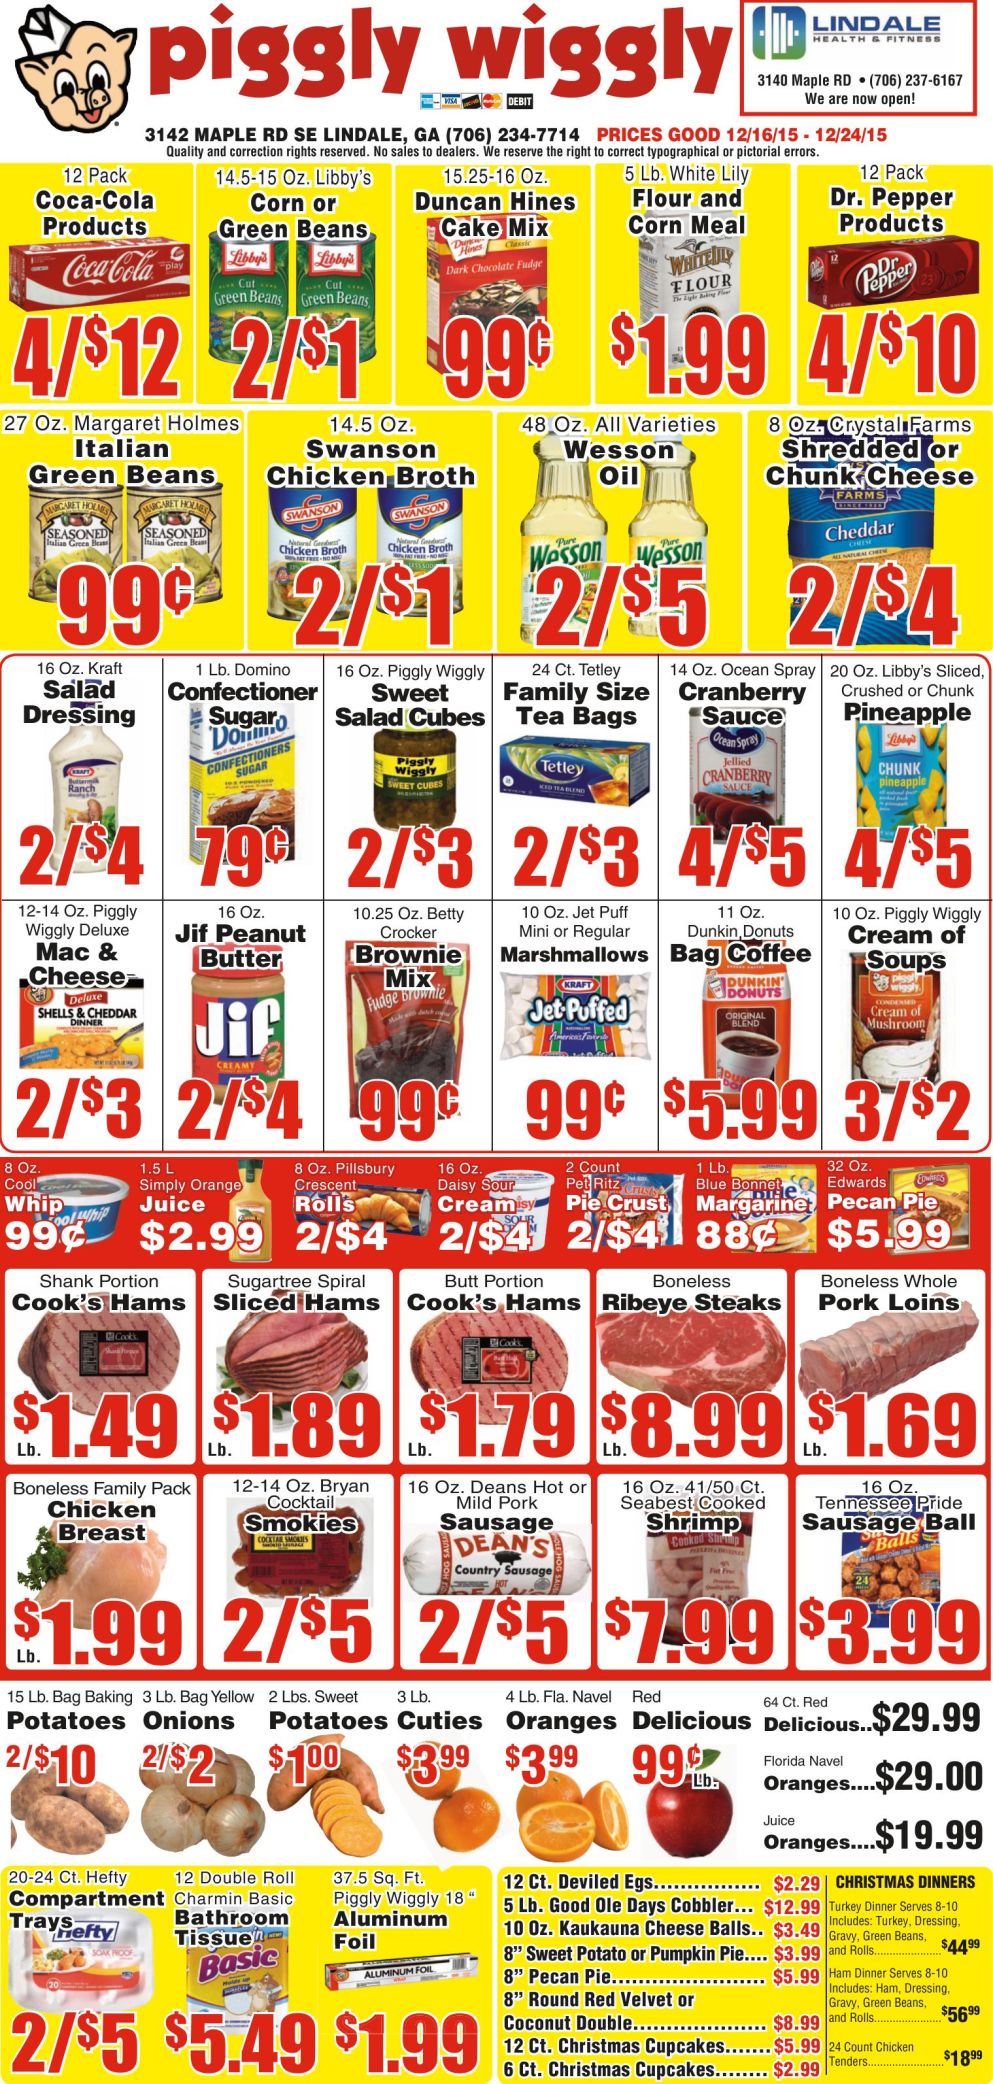 piggly wiggly cairo ga weekly ad